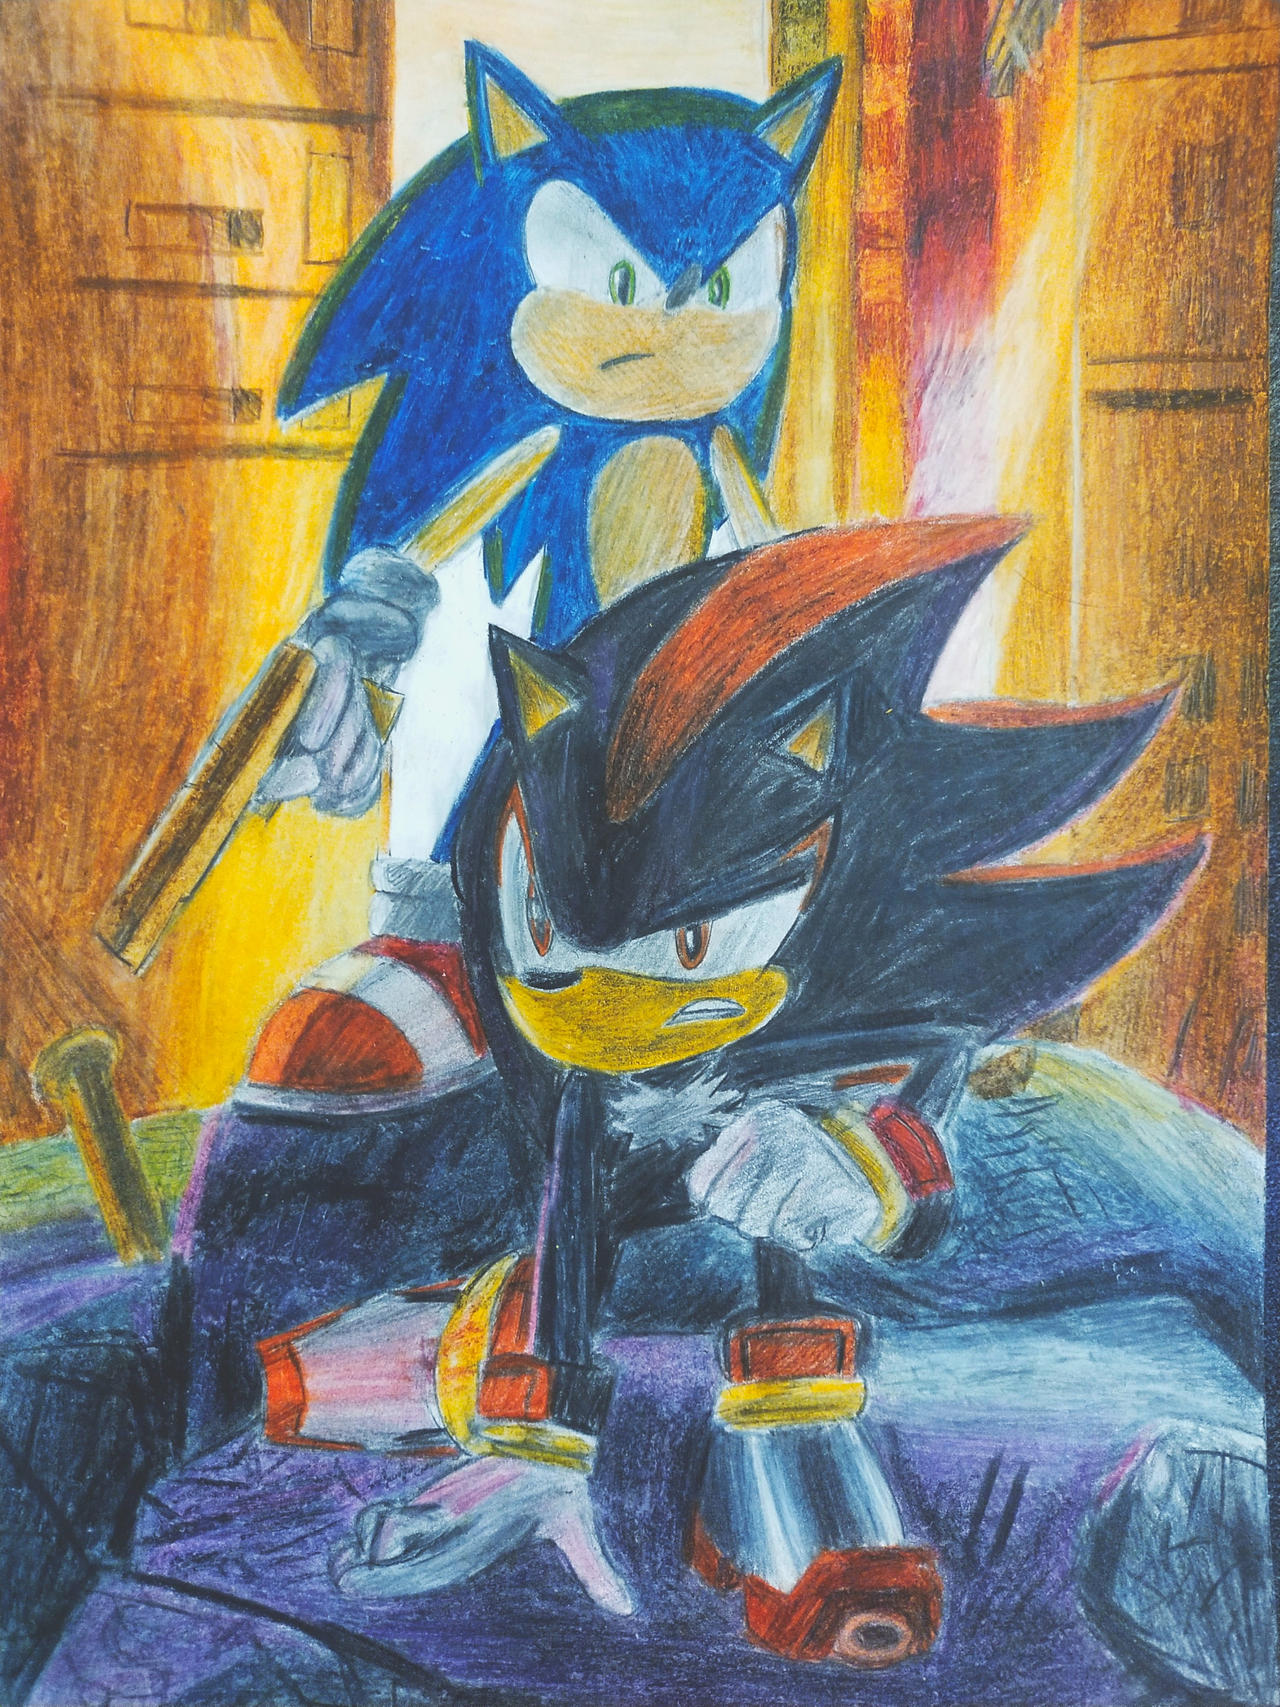 SONIC AND SHADOW by DOMREP1 on DeviantArt